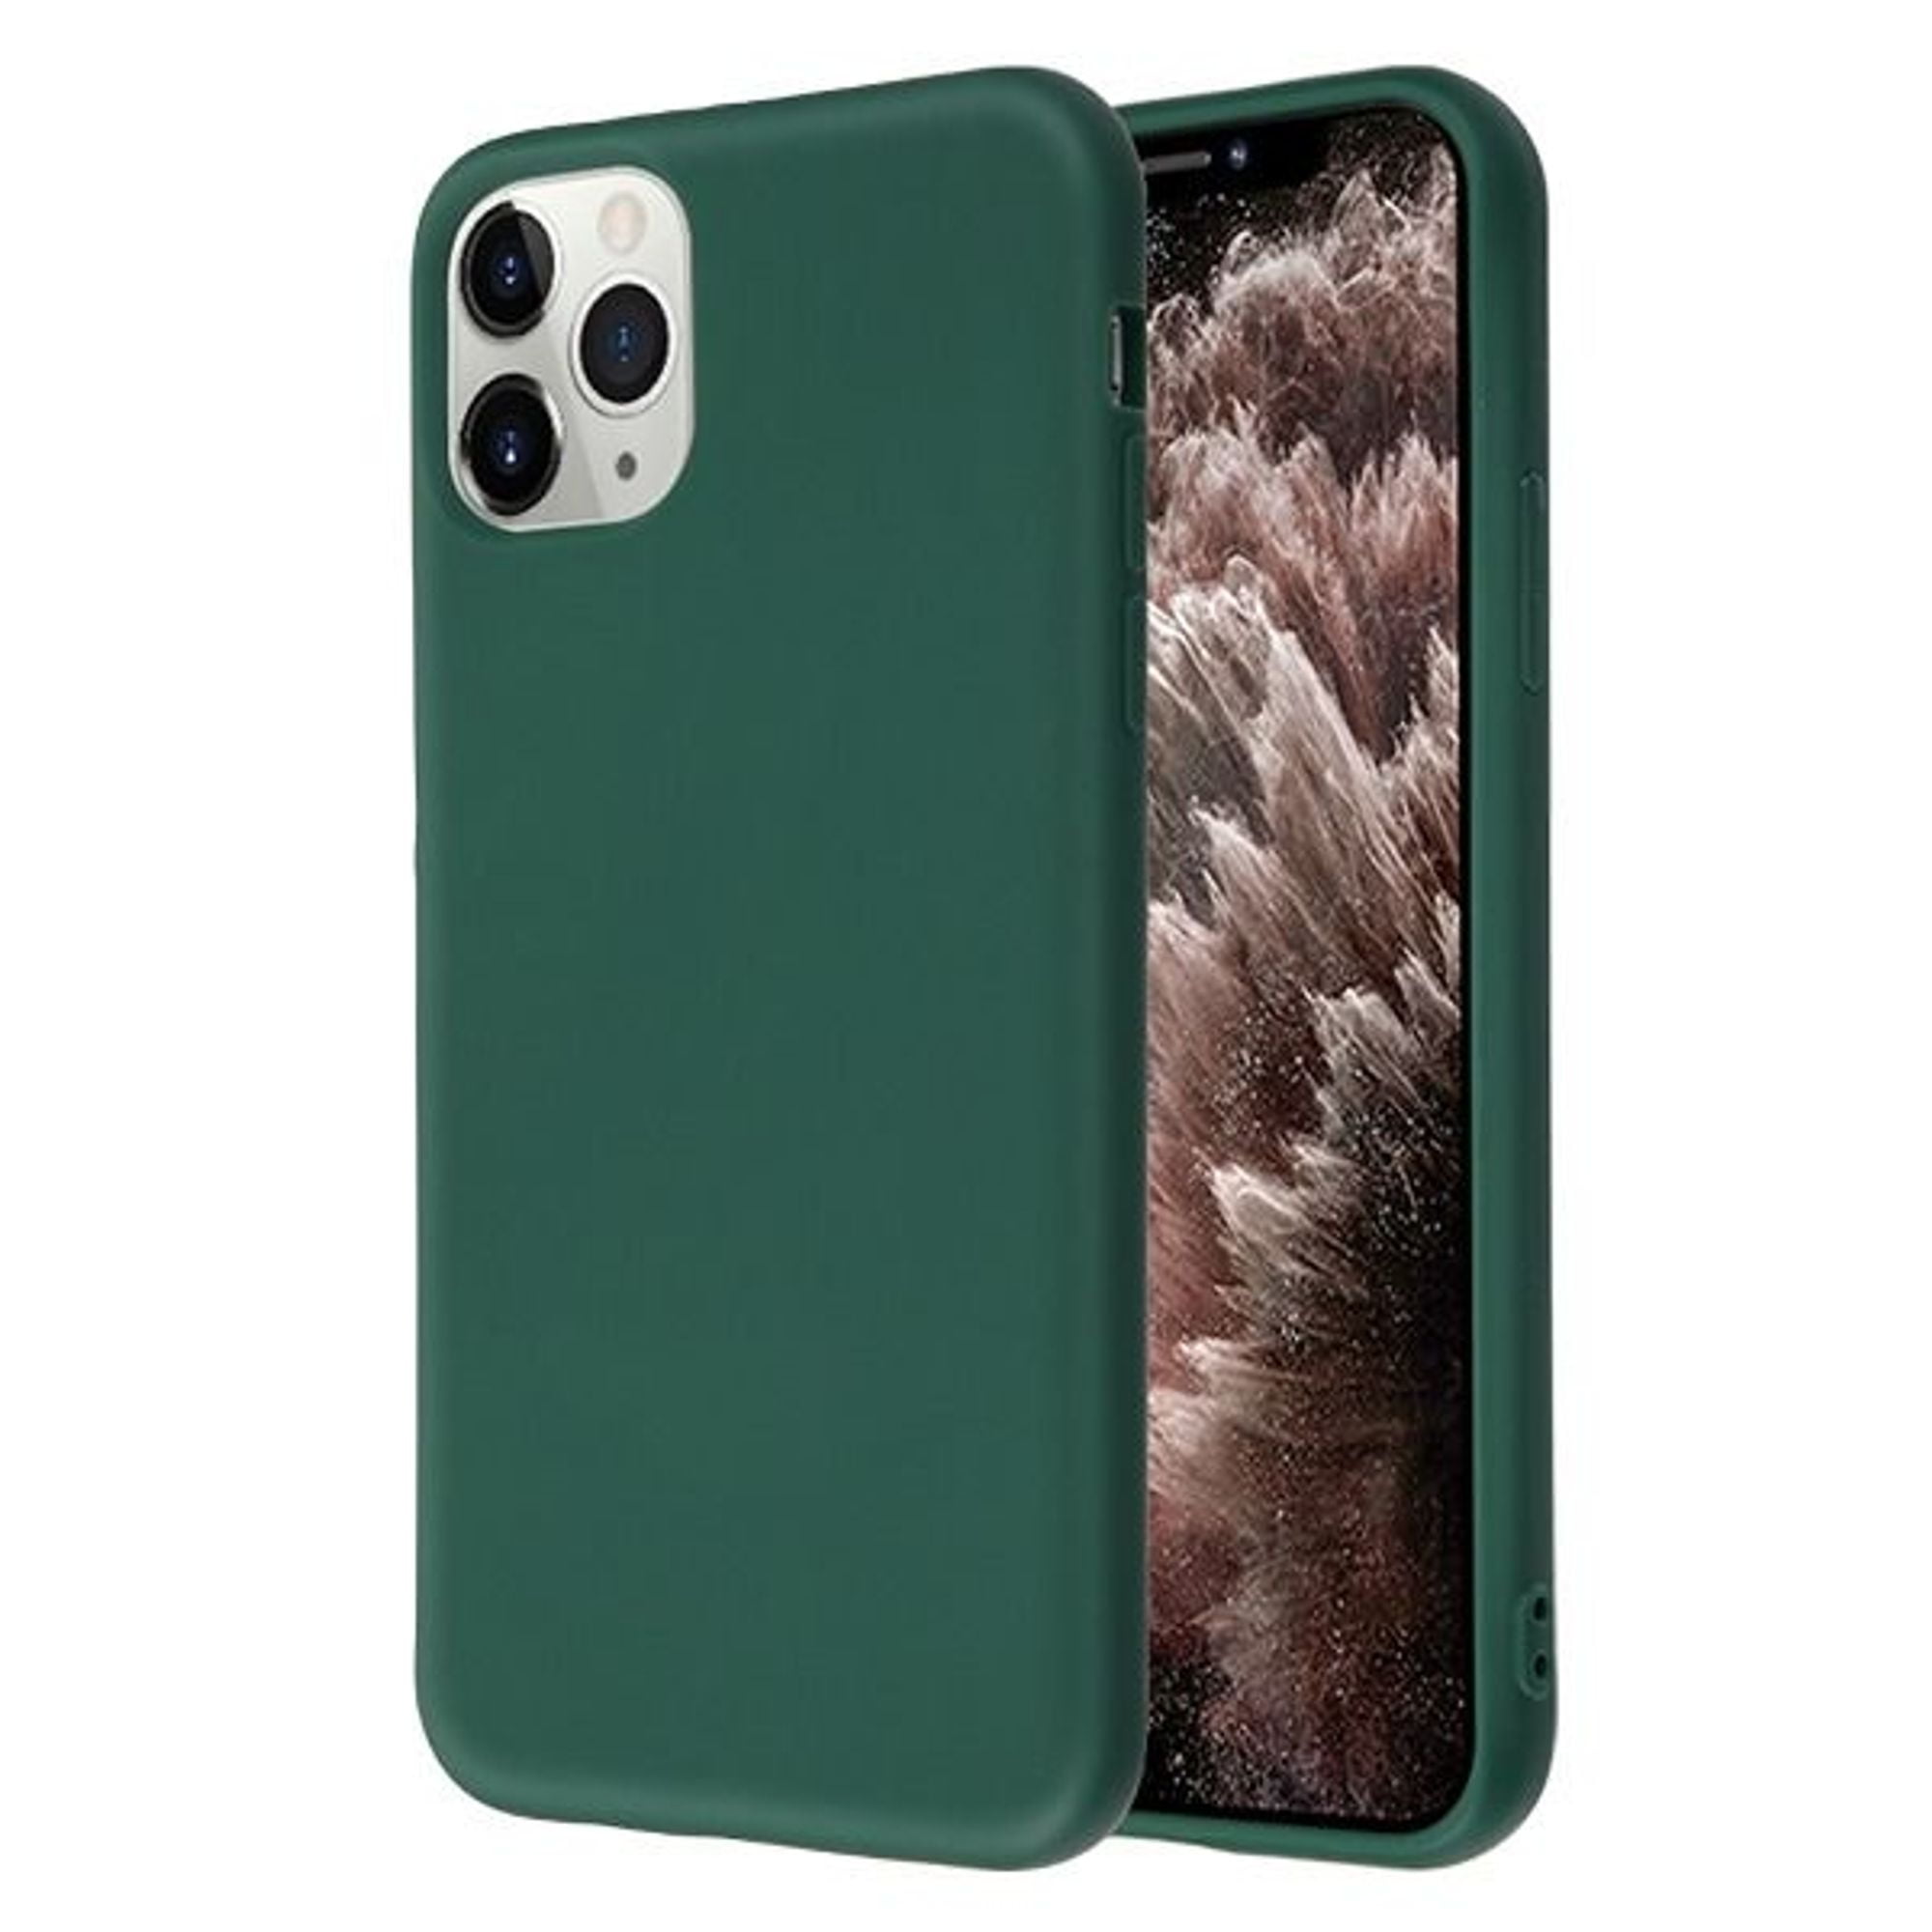 For Apple Iphone Samsung Galaxy Case By Mybat Liquid Silicone Rubber Hard Snap In Compatible With Apple Iphone 11 Green Walmart Com Walmart Com